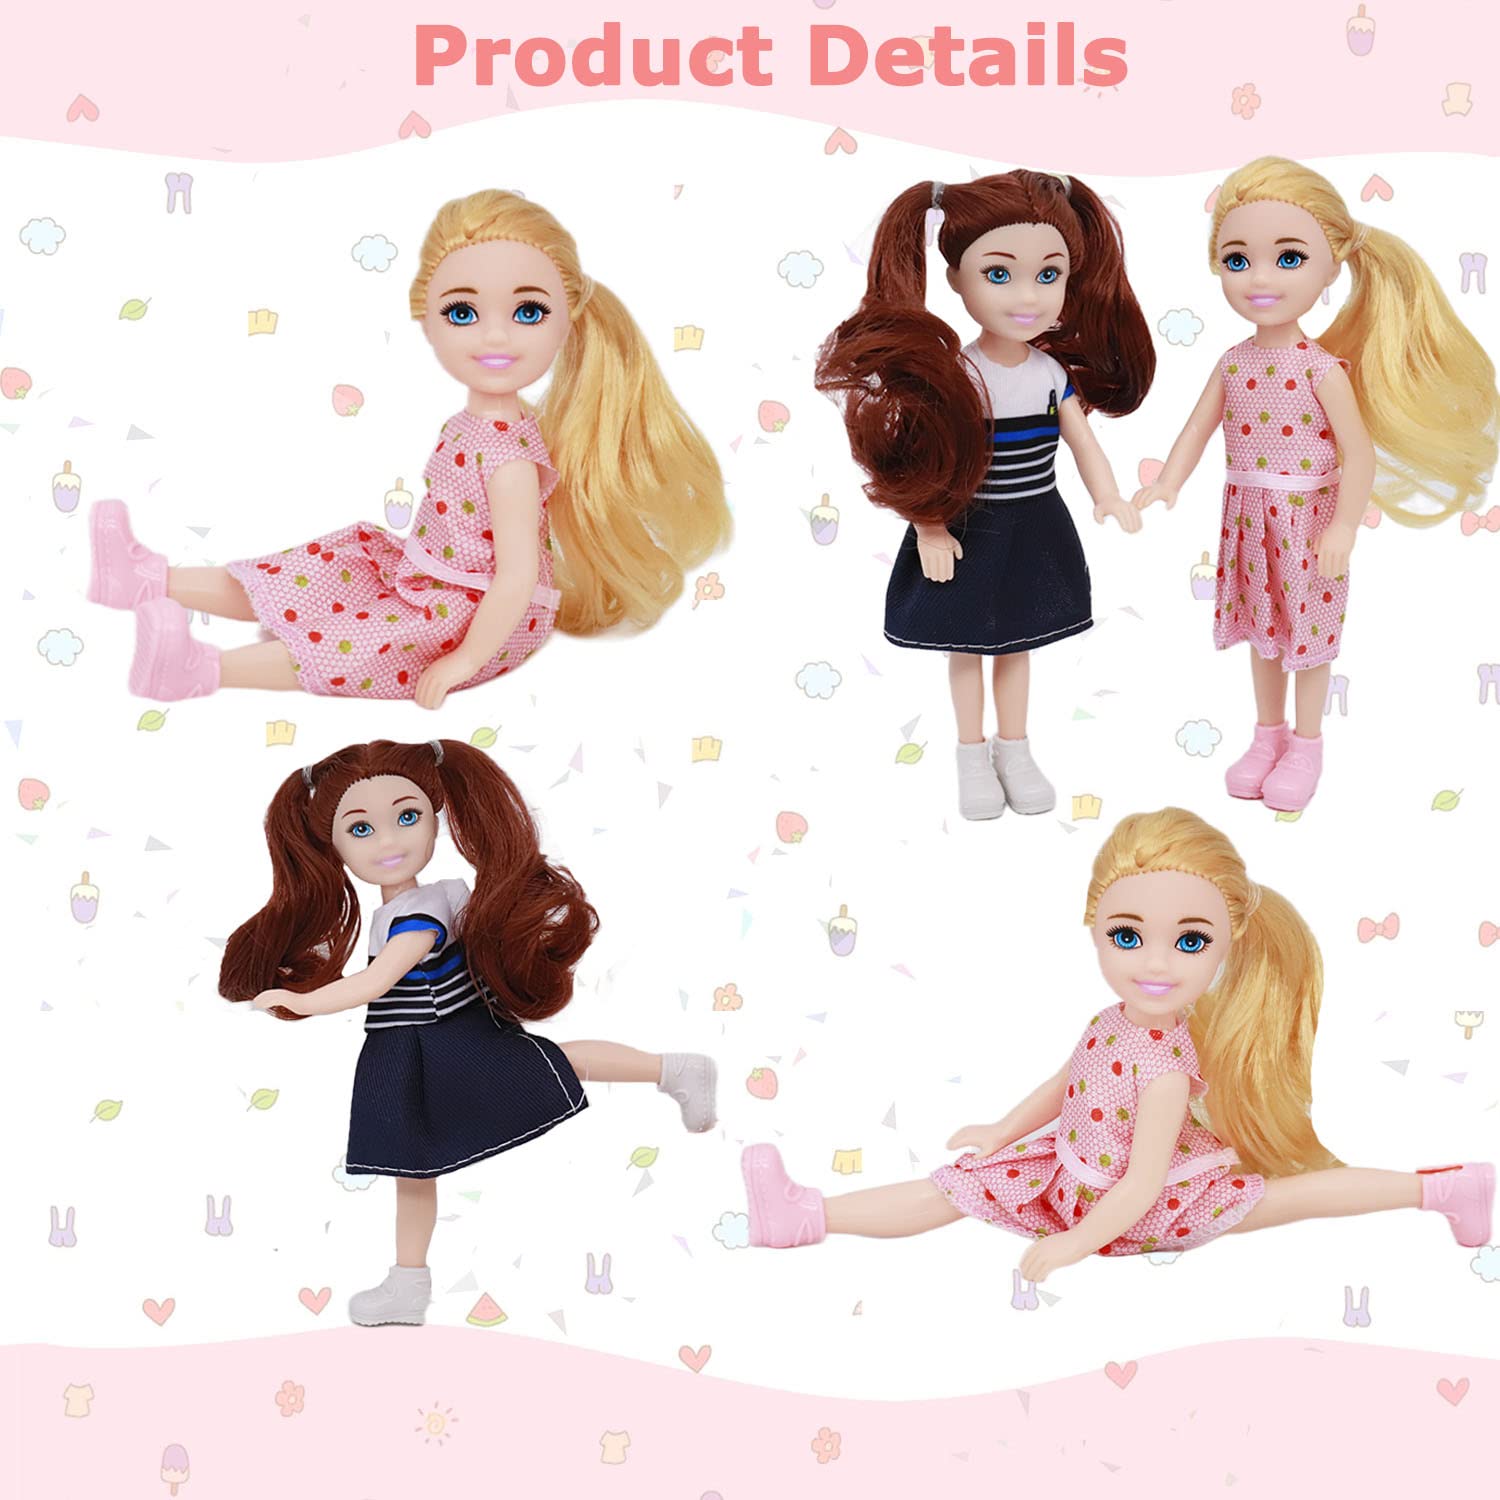 Lembani 10 Sets 5 Inch Mini Dolls with Clothes, 5 Pieces Boy Dolls and 5 Pieces Girl Dolls, Mini Princess Dolls Toy for Dollhouse Kids Gifts